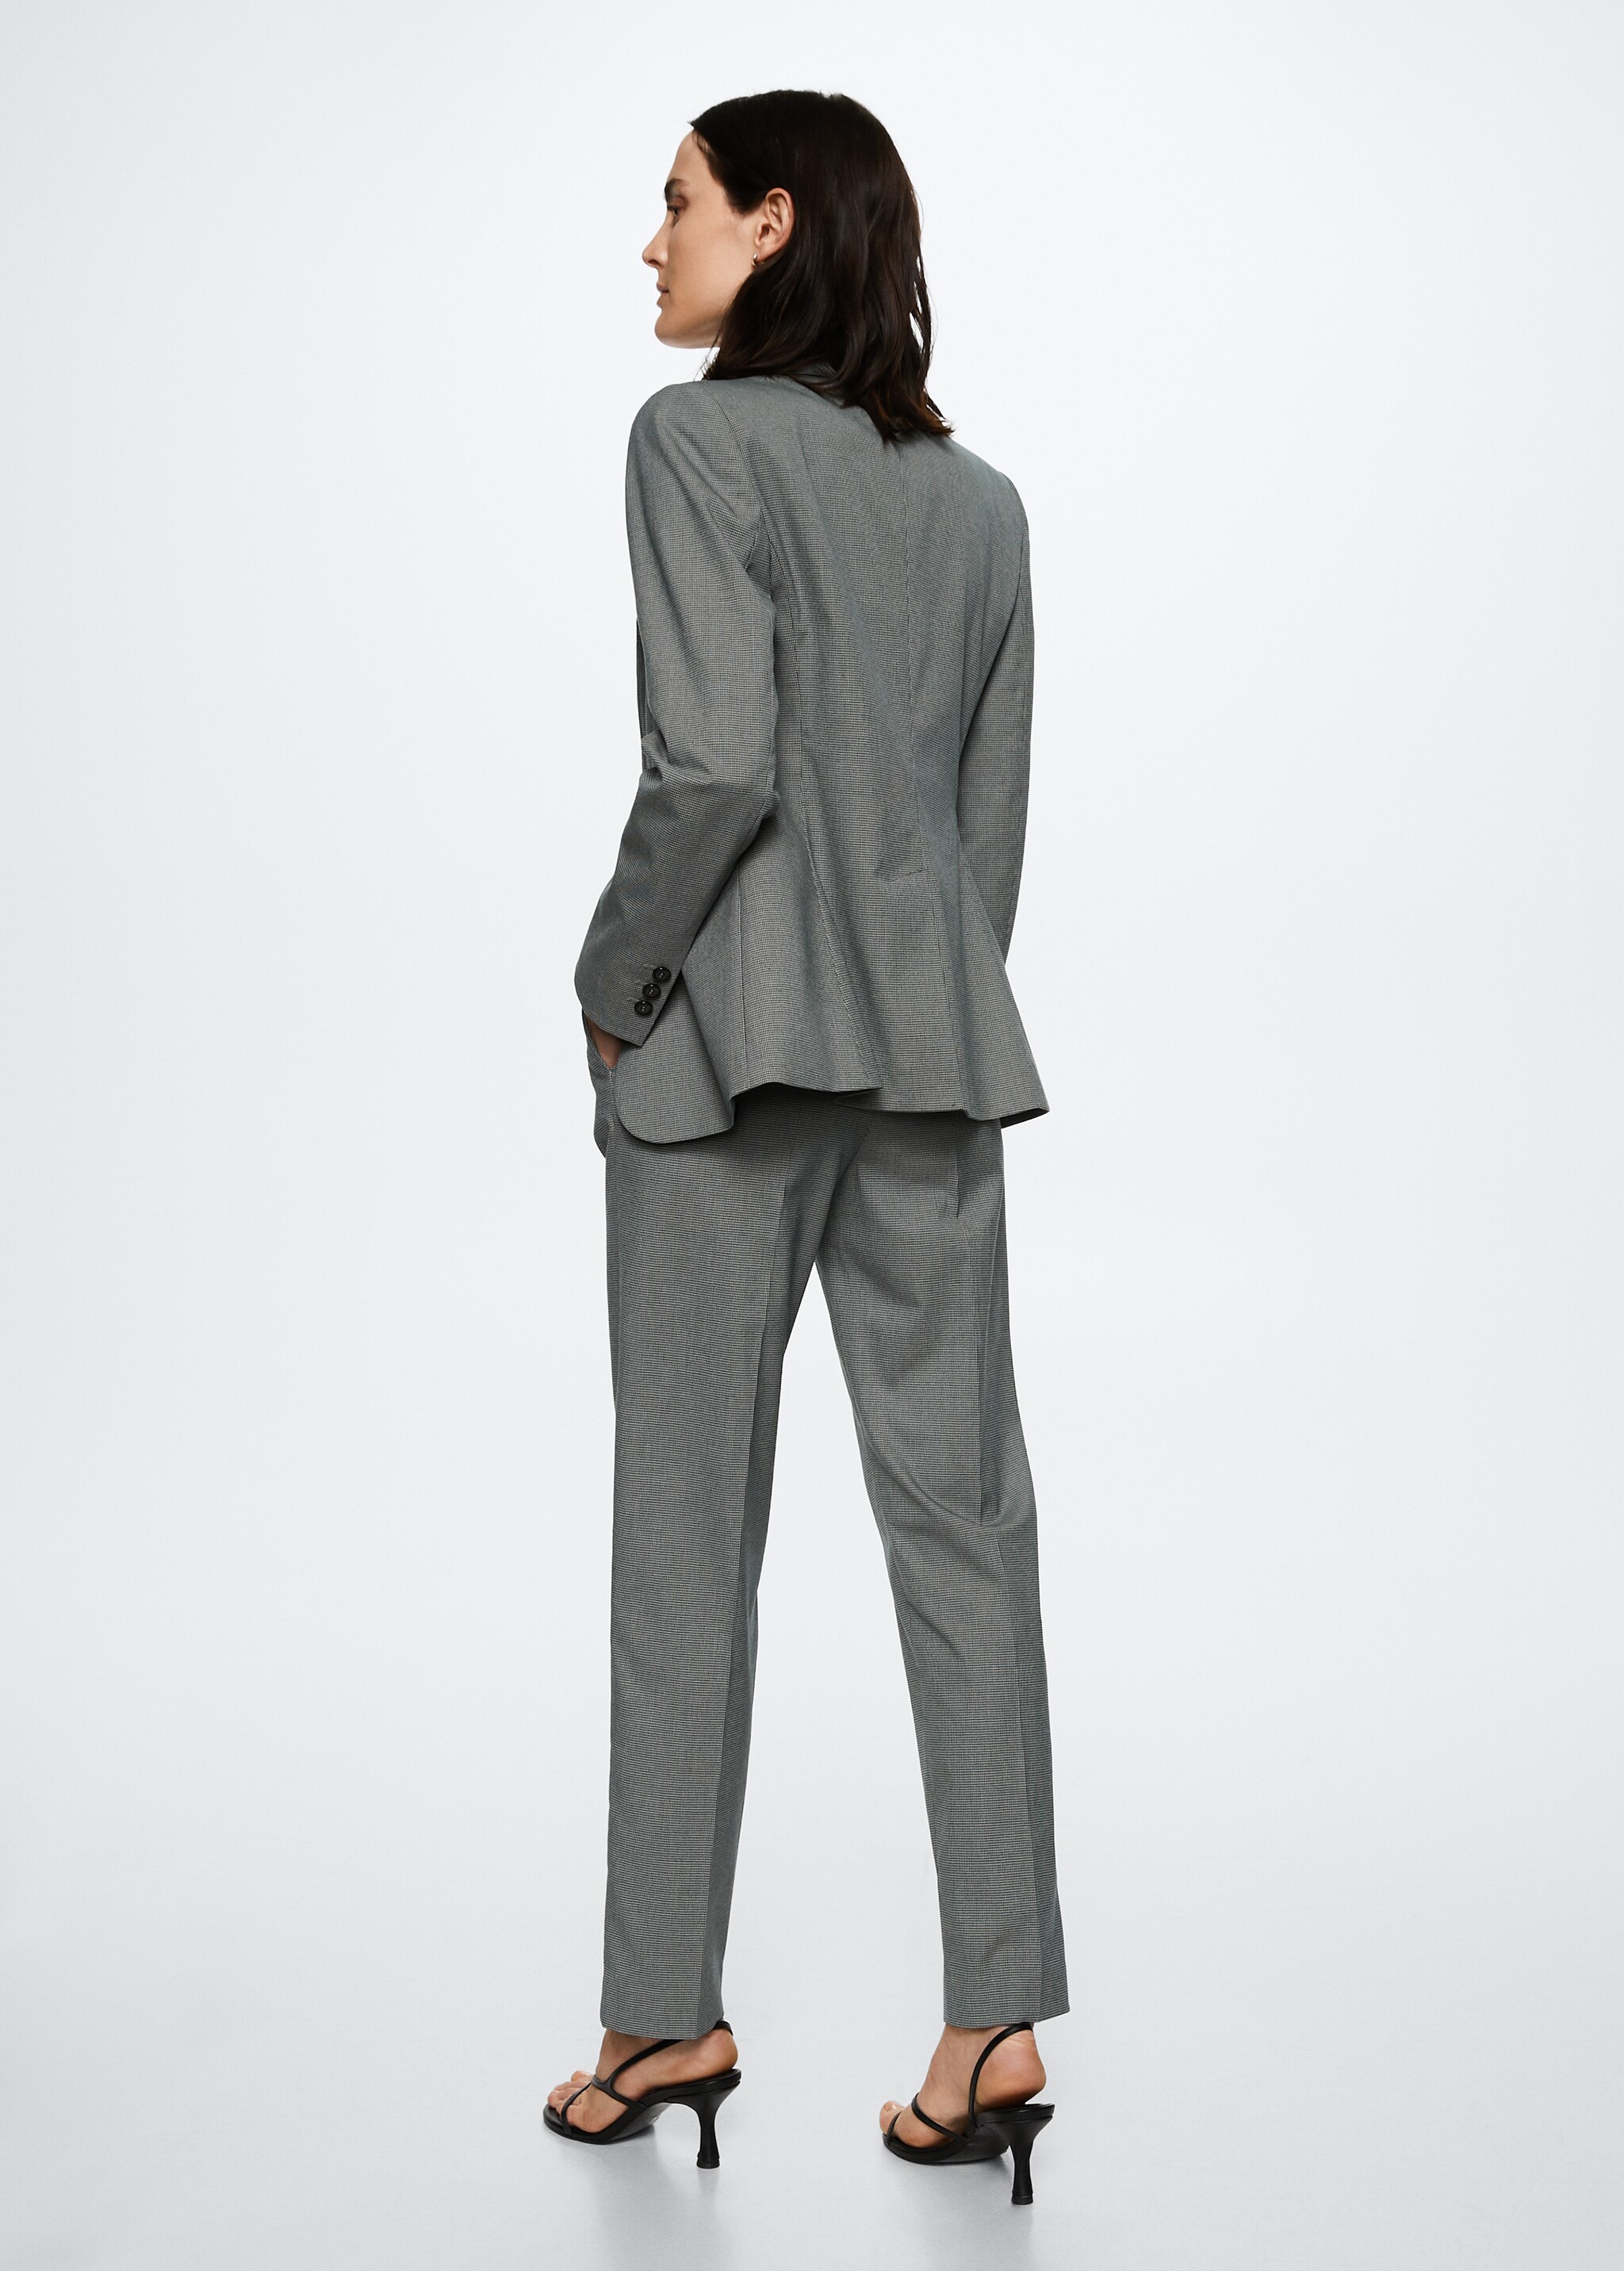 Patterned suit blazer - Reverse of the article